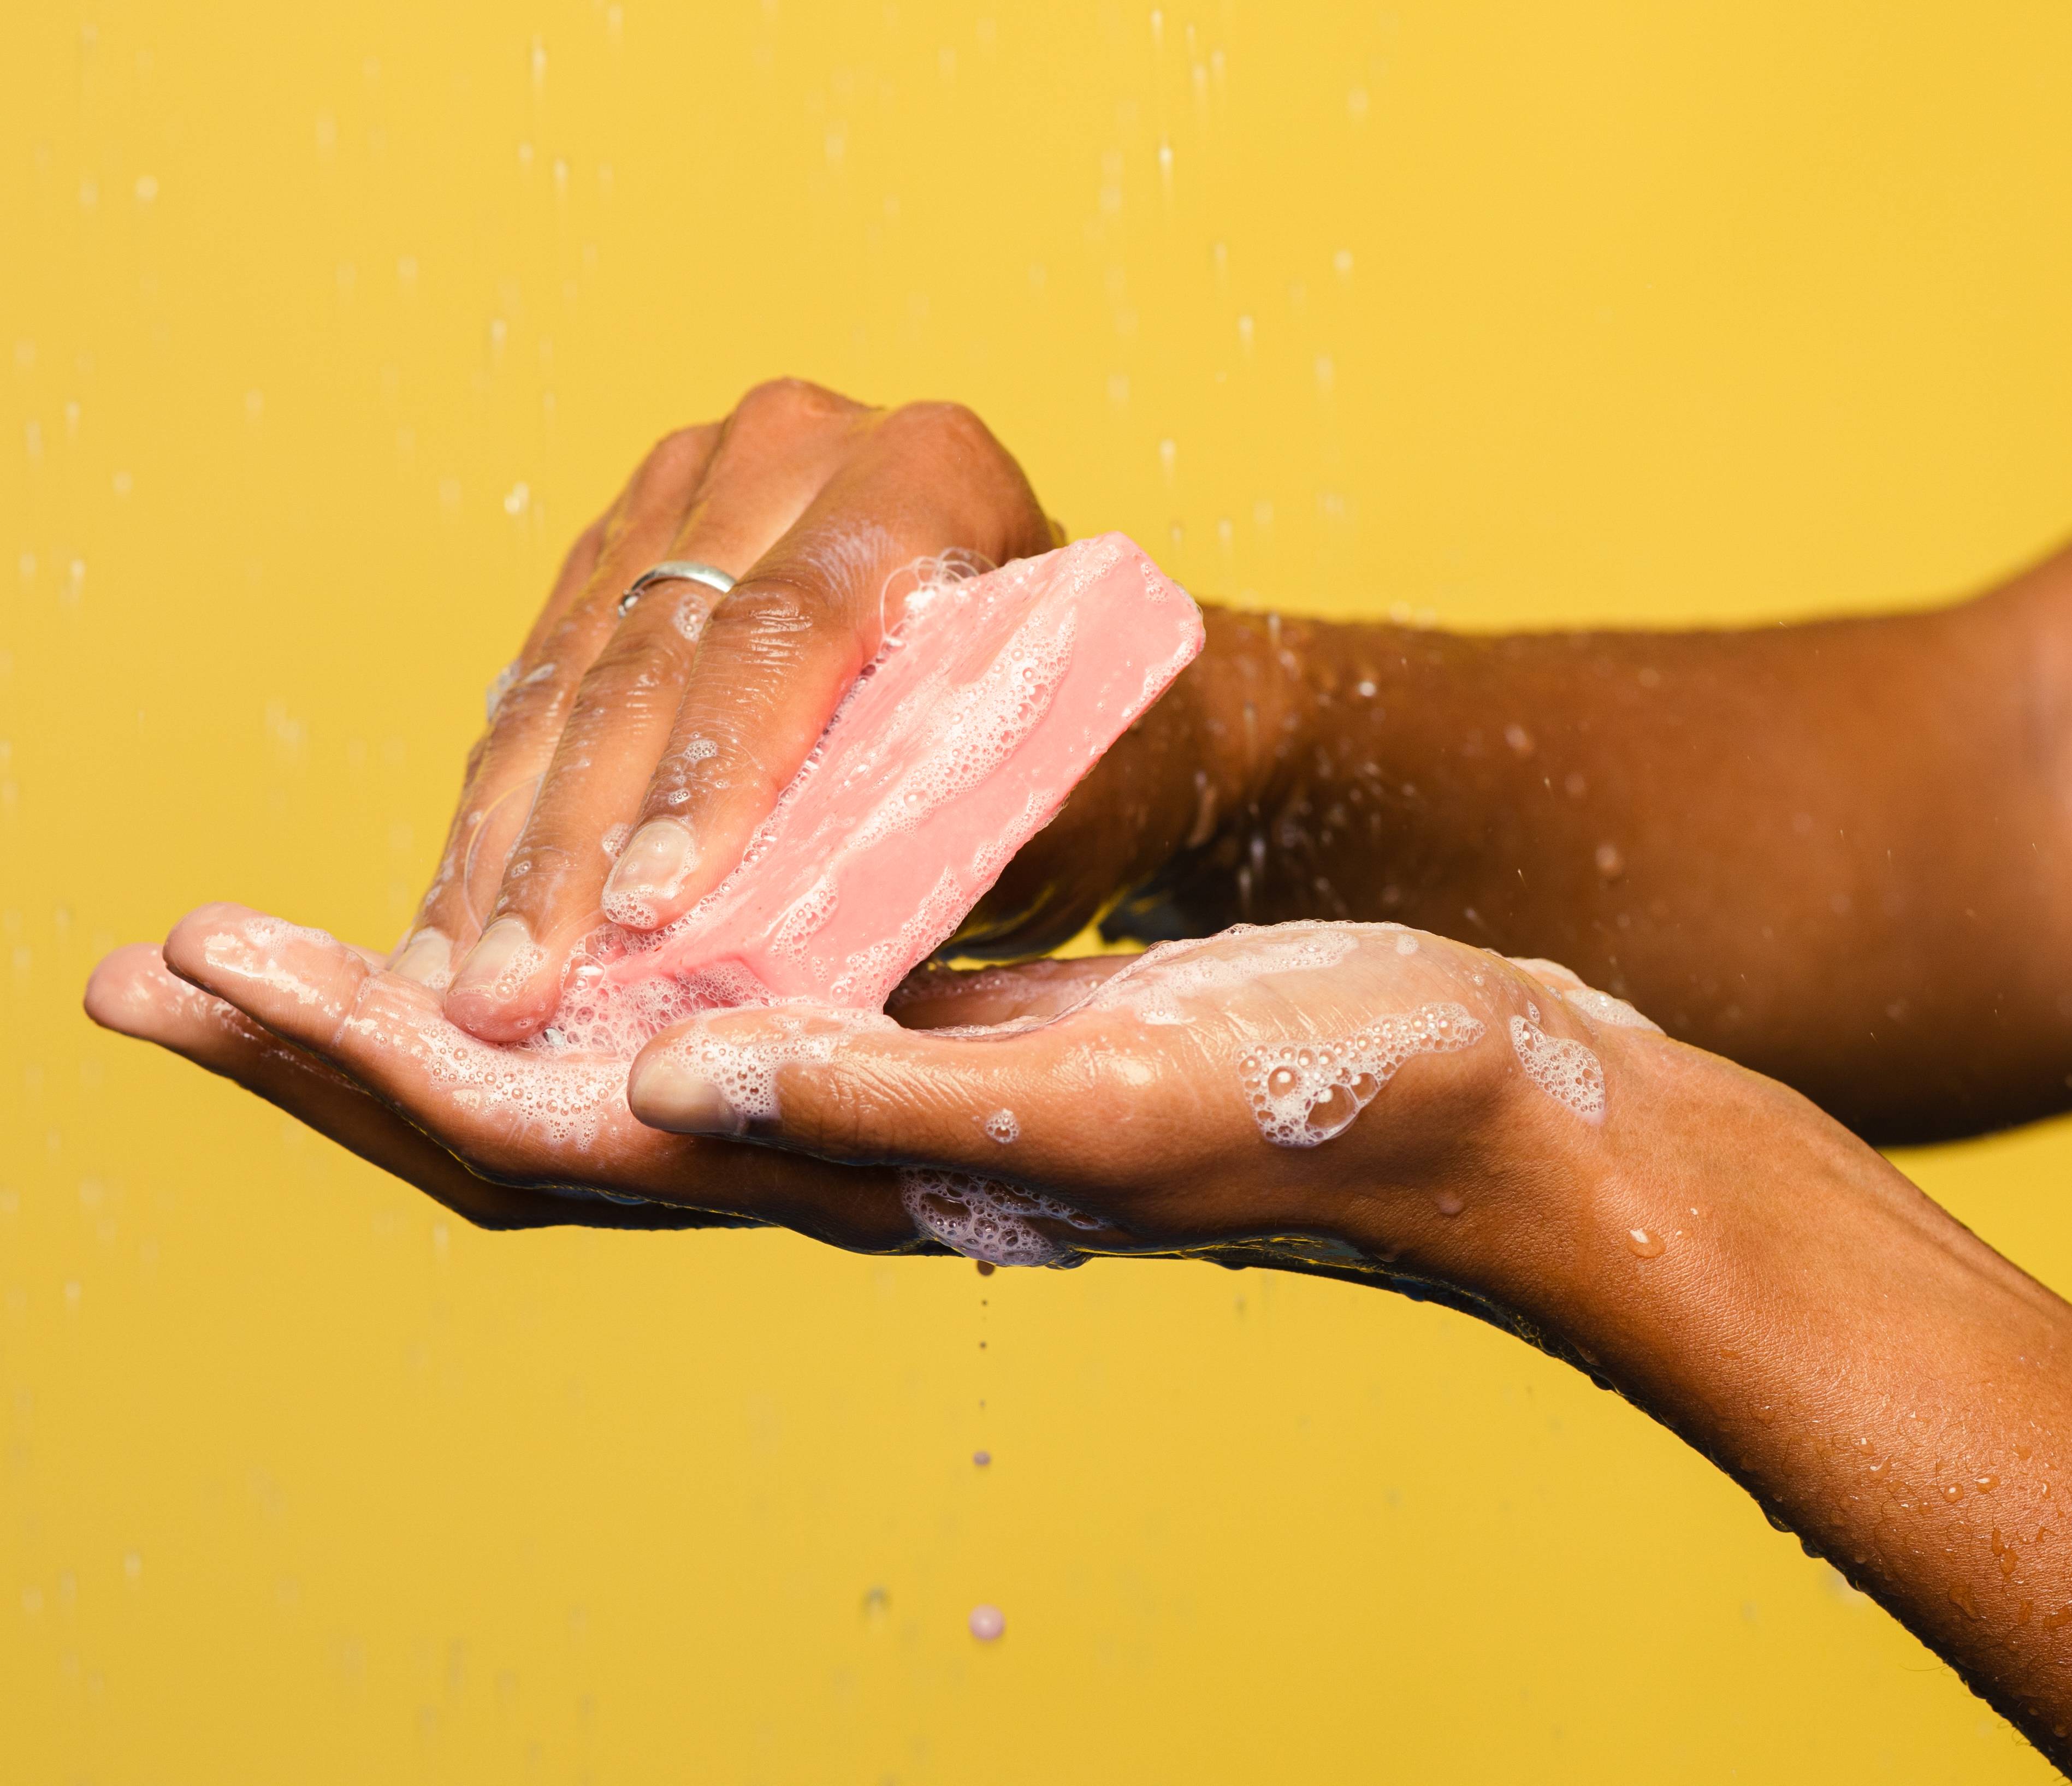 A bubbly close-up of Lotus Flower lathering up in a person's hands: it's a rosy pink soap.